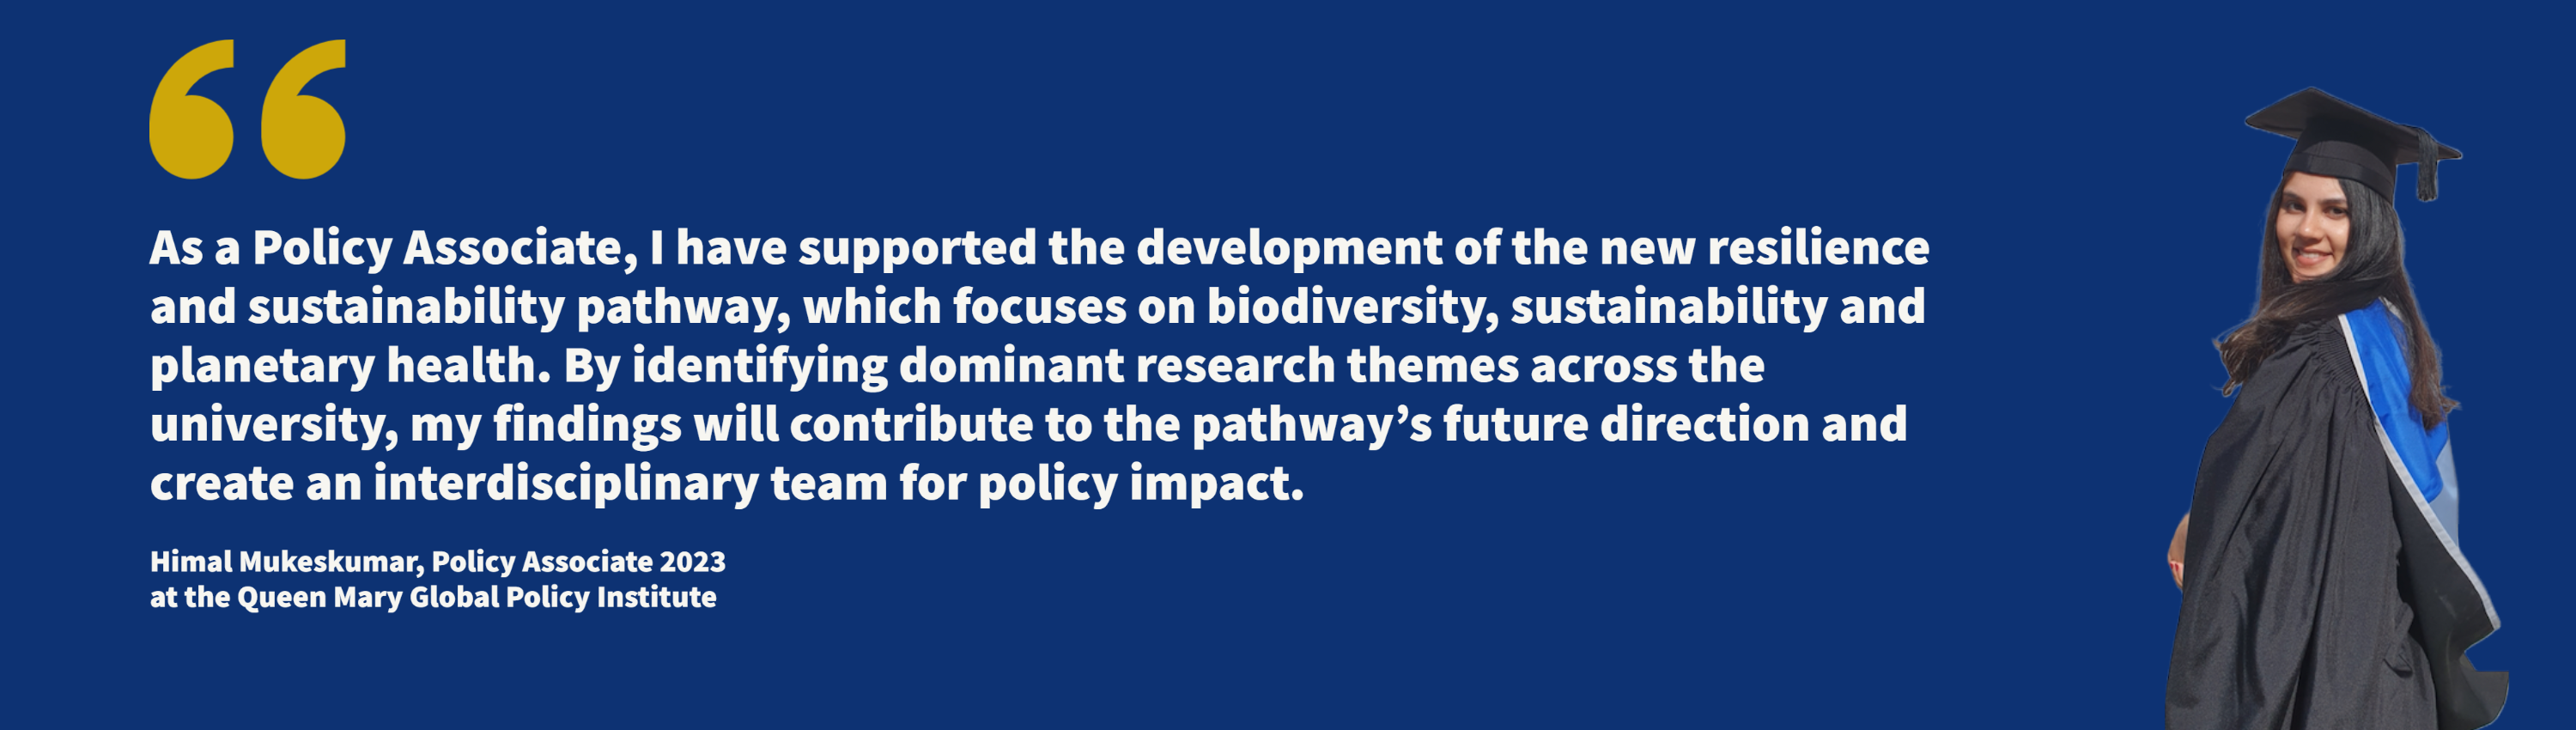 A quote from one of the 2023 cohort of Policy Associates